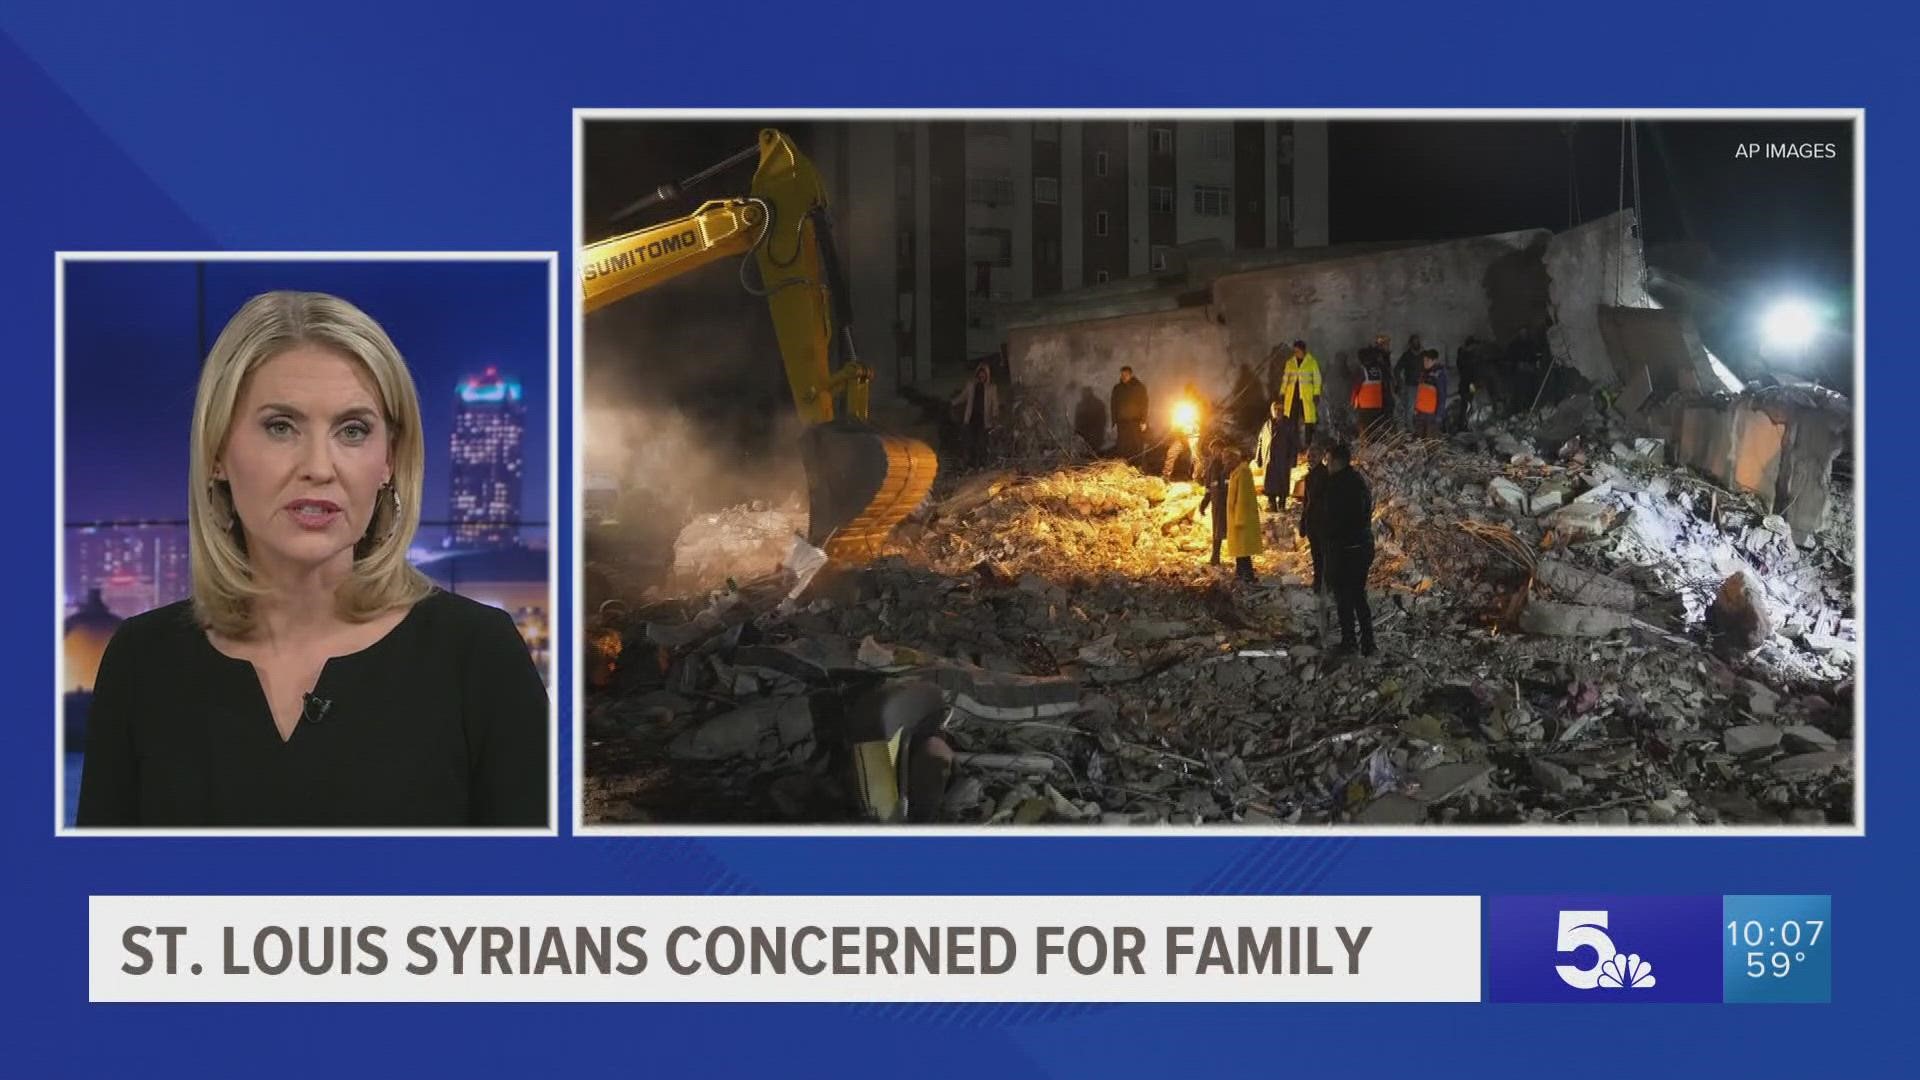 All three families are trying to collect money to send to their loved ones affected in Syria and Turkey.